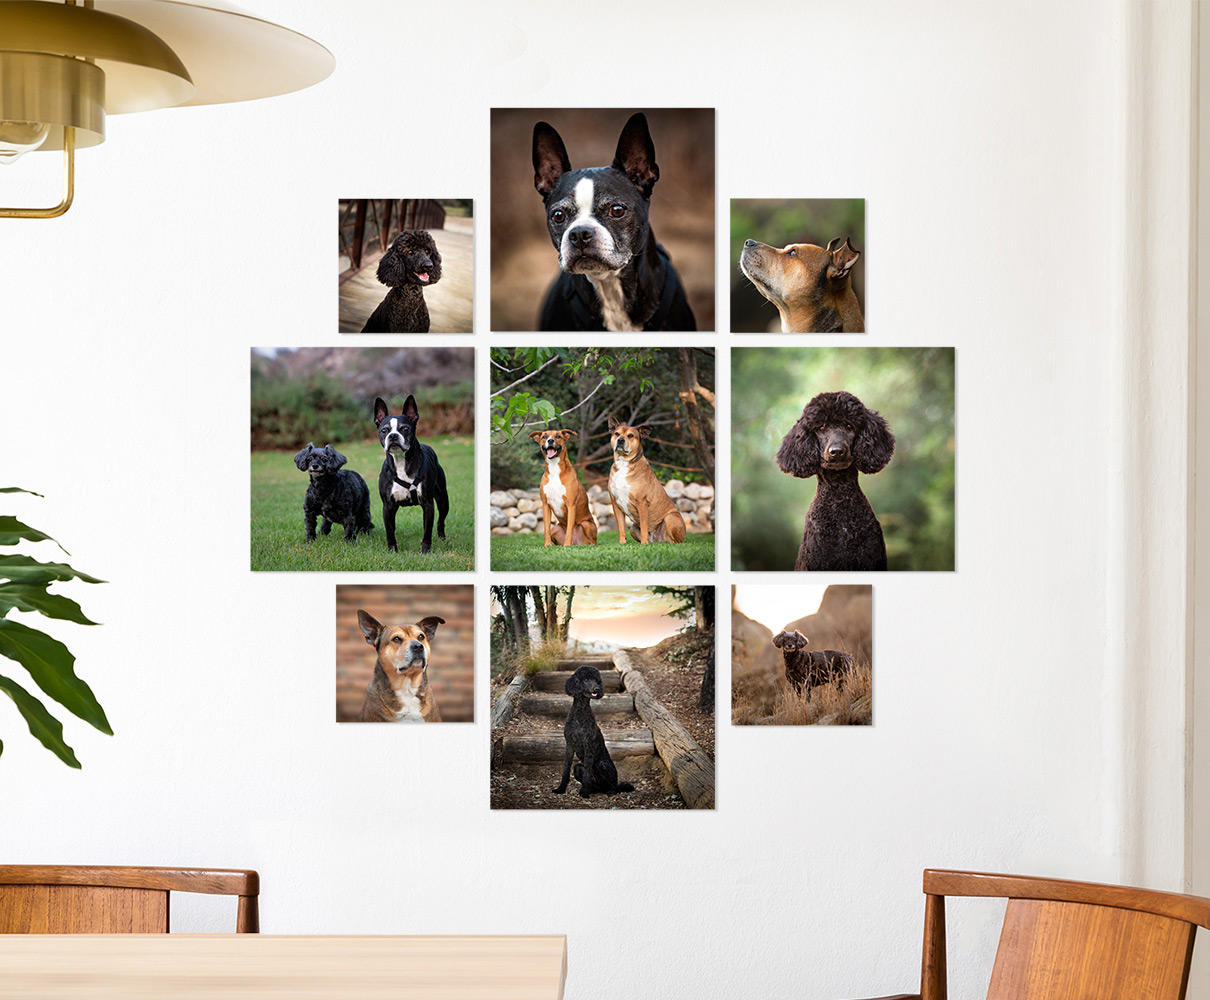 25% Off Stick-n-Switch Photo Tiles!